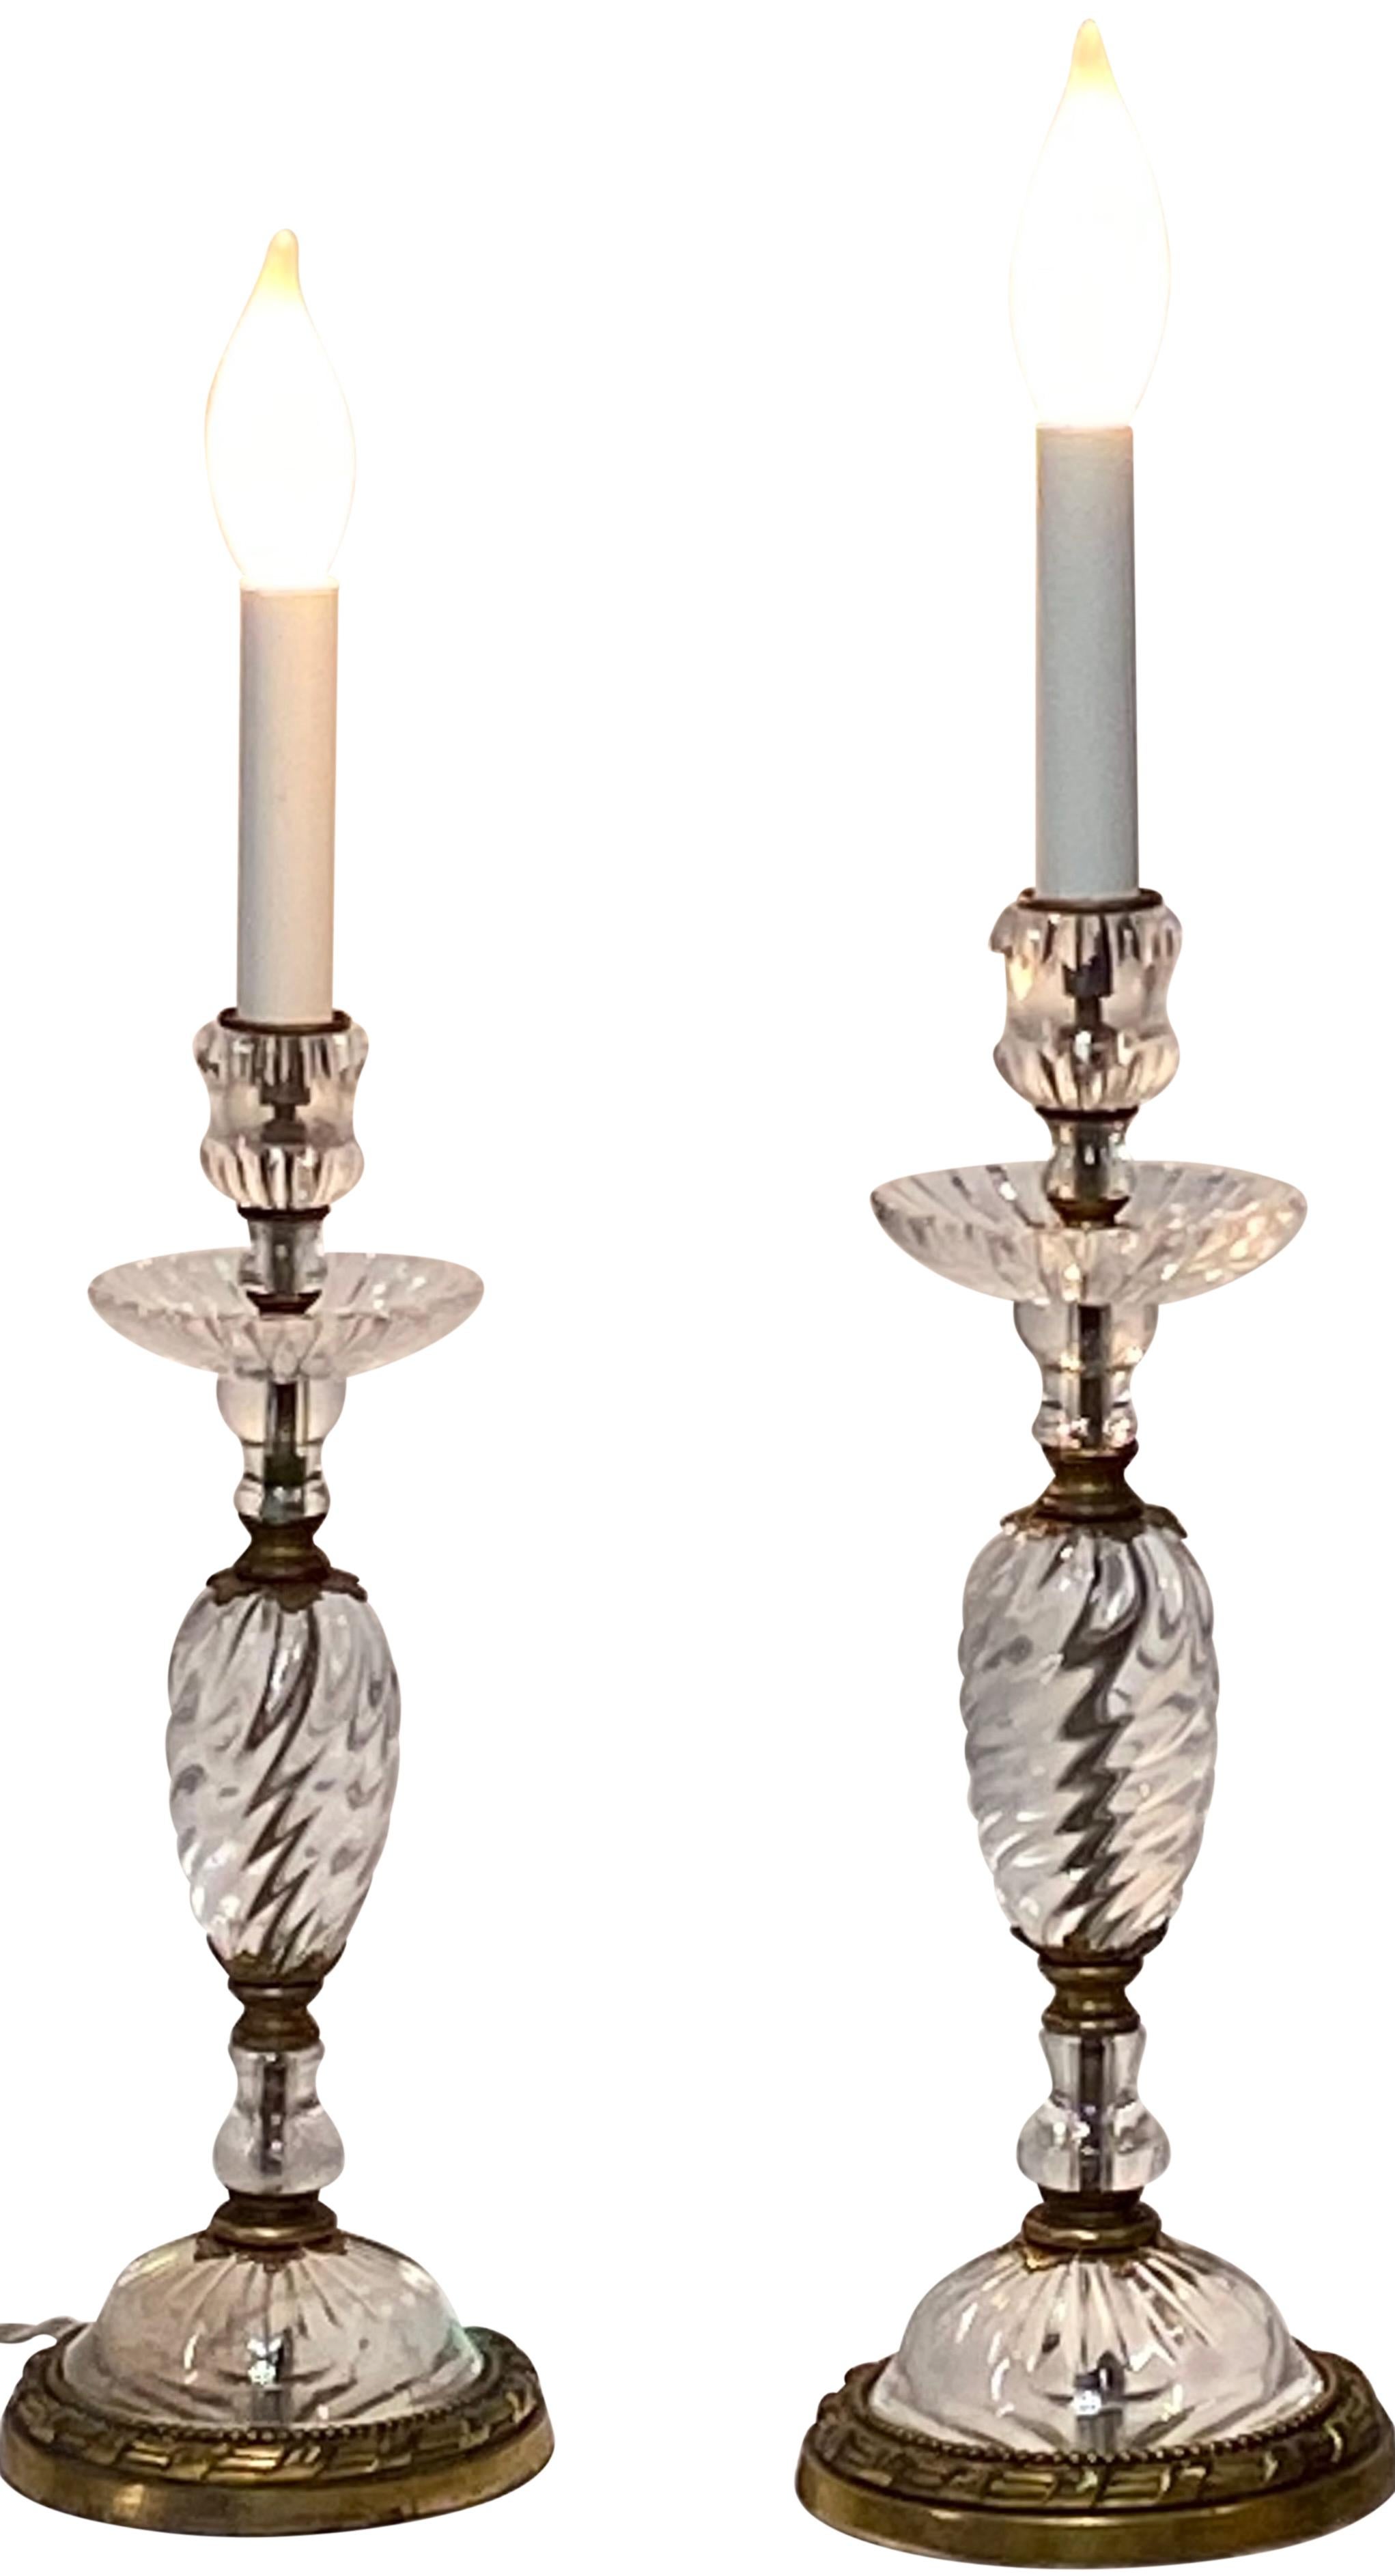 Pair of Early 19th Century French Rock Crystal Candle Stick Boudoir Lamps For Sale 4